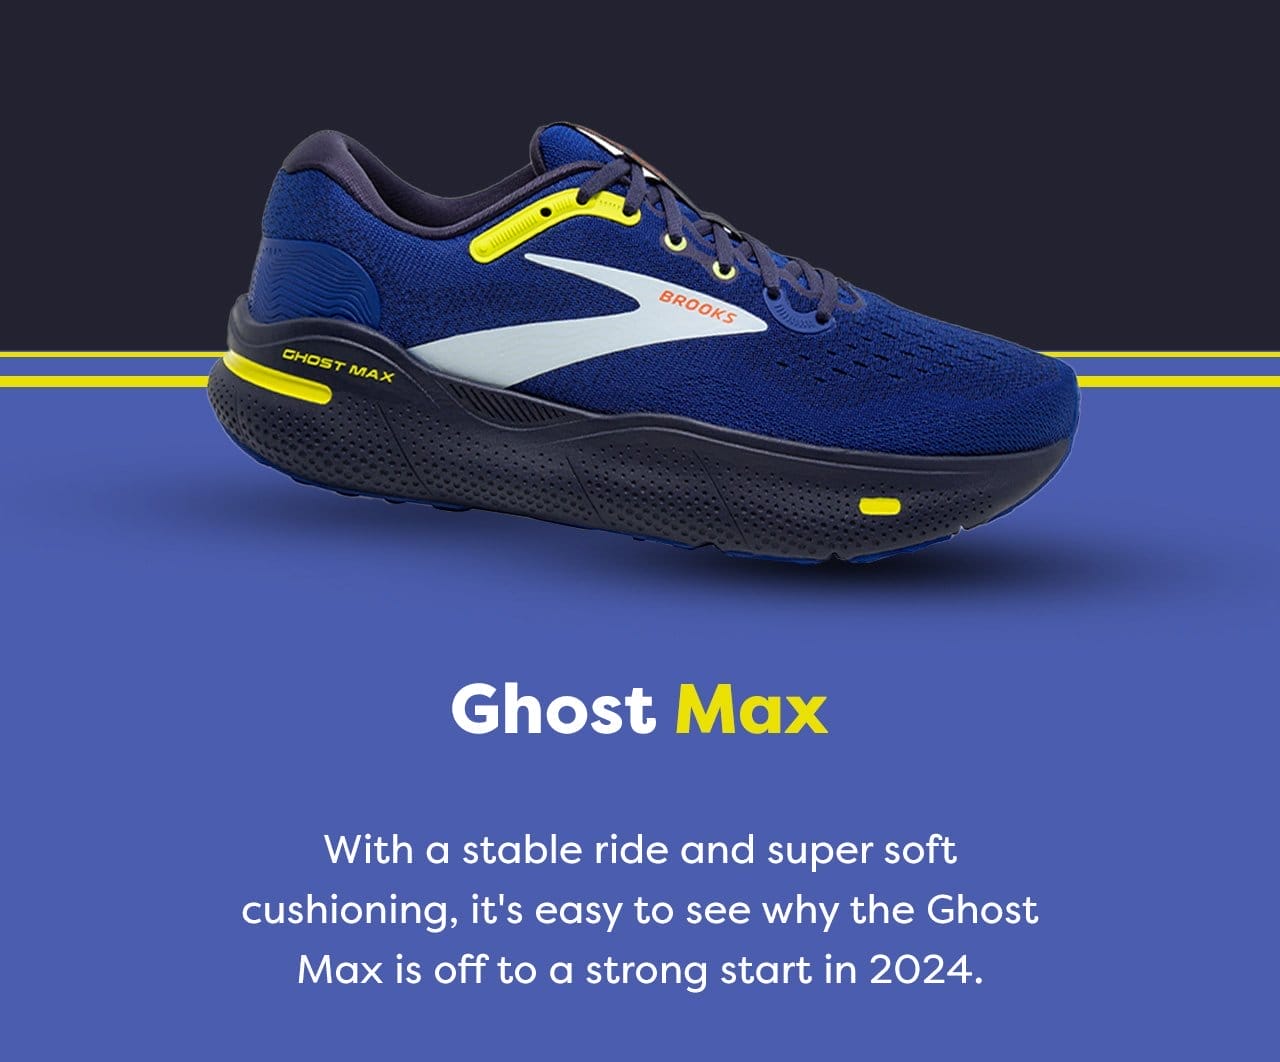 Ghost Max - With a stable ride and super soft cushioning, it's easy to see why the Ghost Max is off to a strong start in 2024.